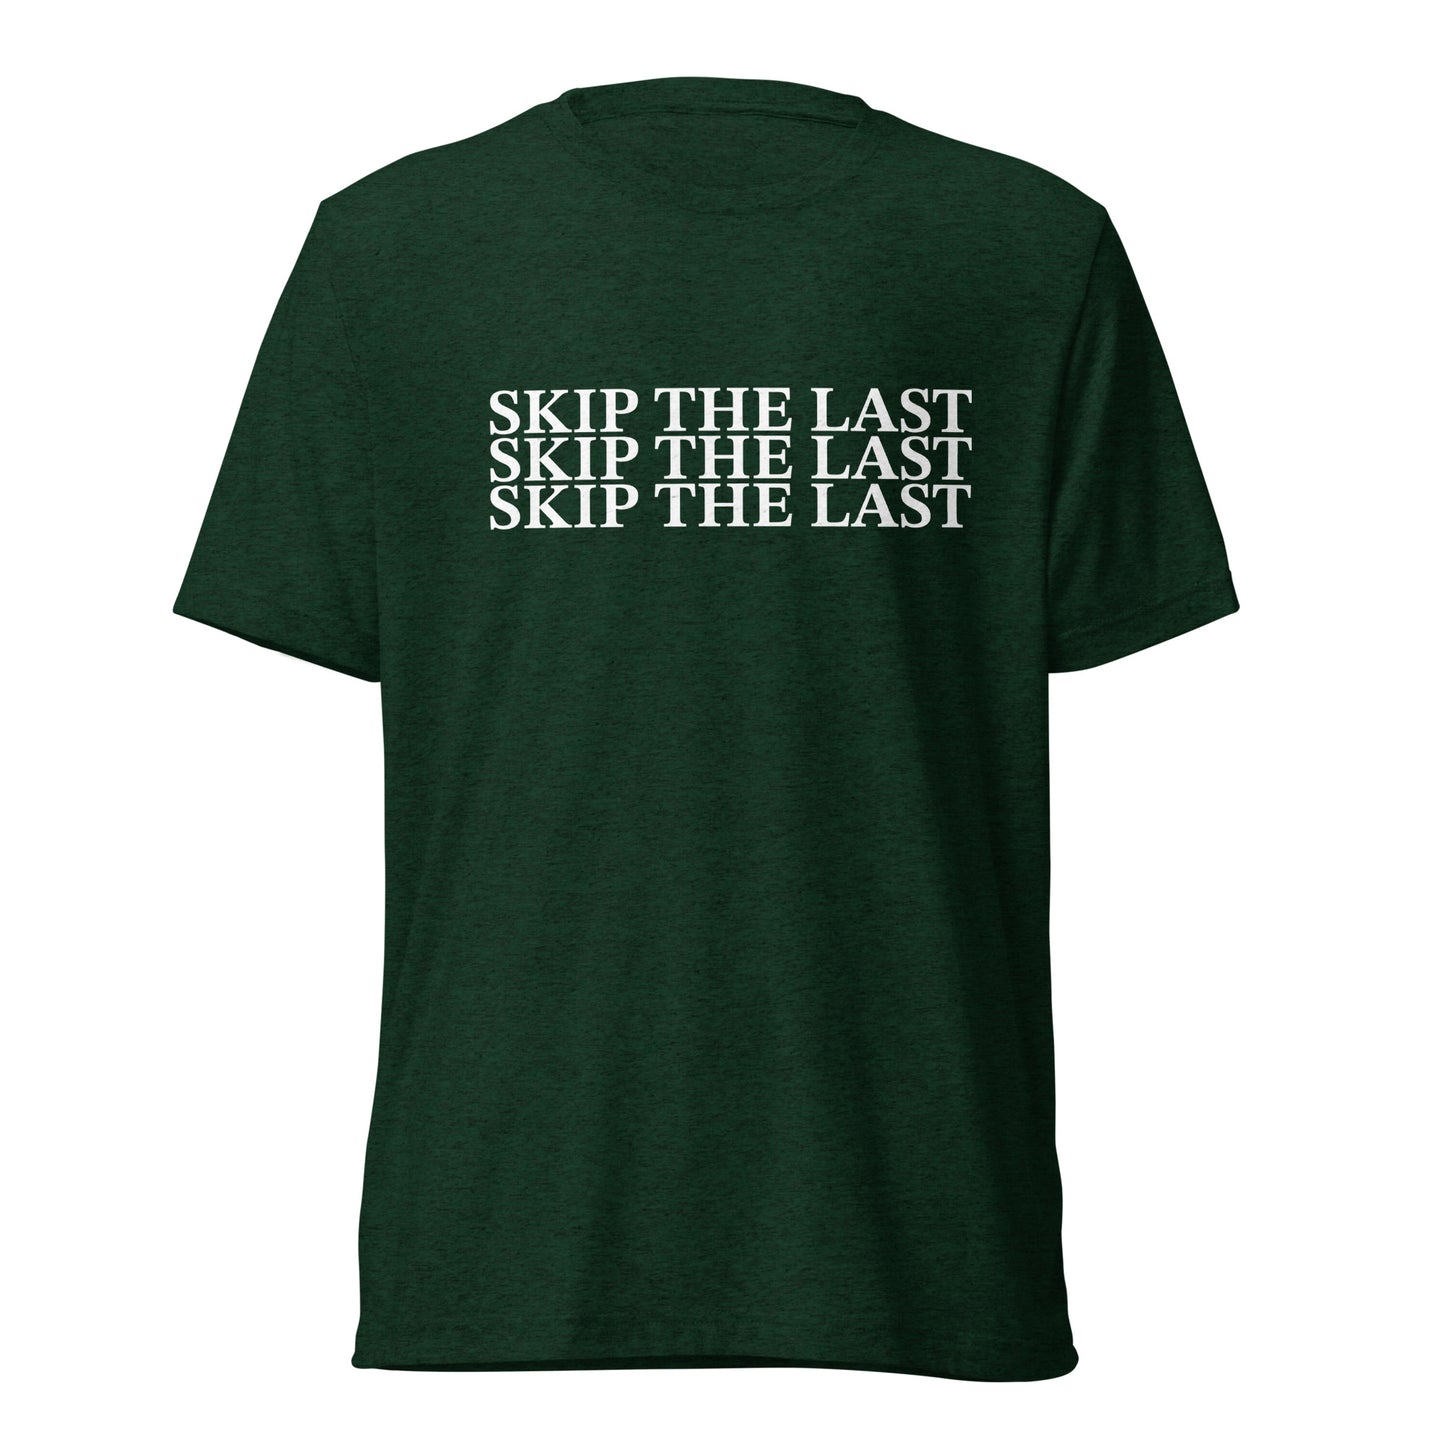 Two More Skip The Last "Skip the Last x3" emerald unisex tri-blend t-shirt. Front view